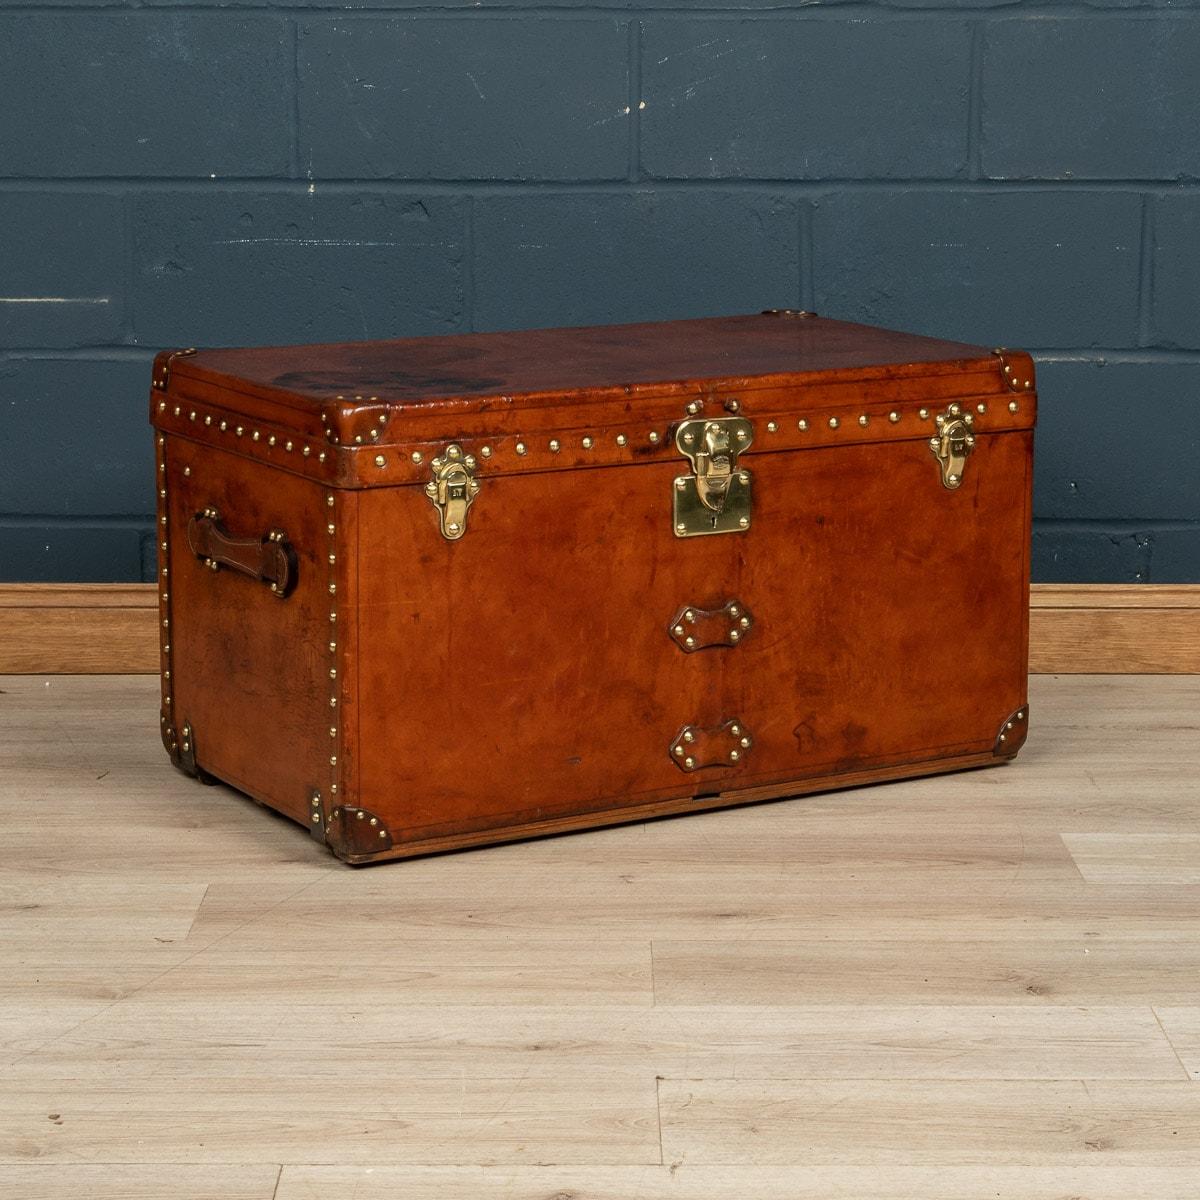 A very rare Louis Vuitton courier trunk covered in leather. Dating to the early part of the 20th century, covered not in the world famous (but more common) monogram canvas but in a single piece of cow hide. The condition inside is in near mint